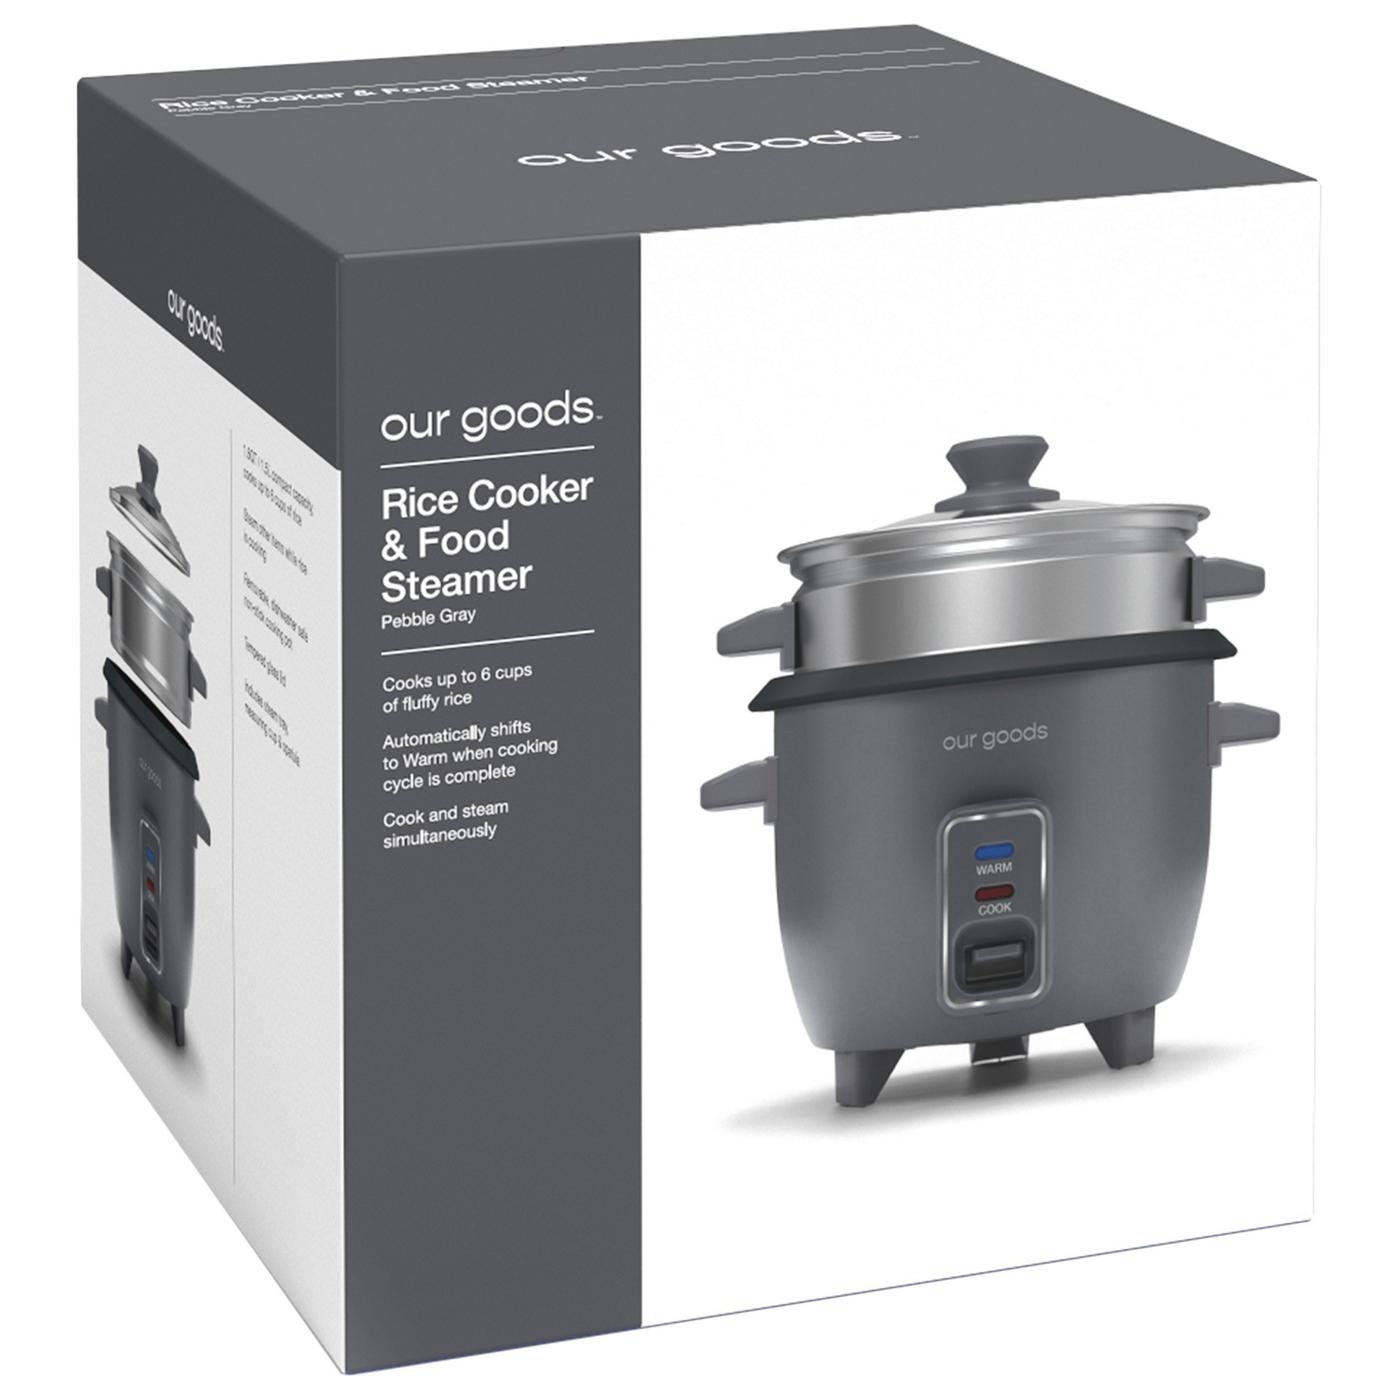 our goods Rice Cooker & Food Steamer - Pebble Gray; image 2 of 3